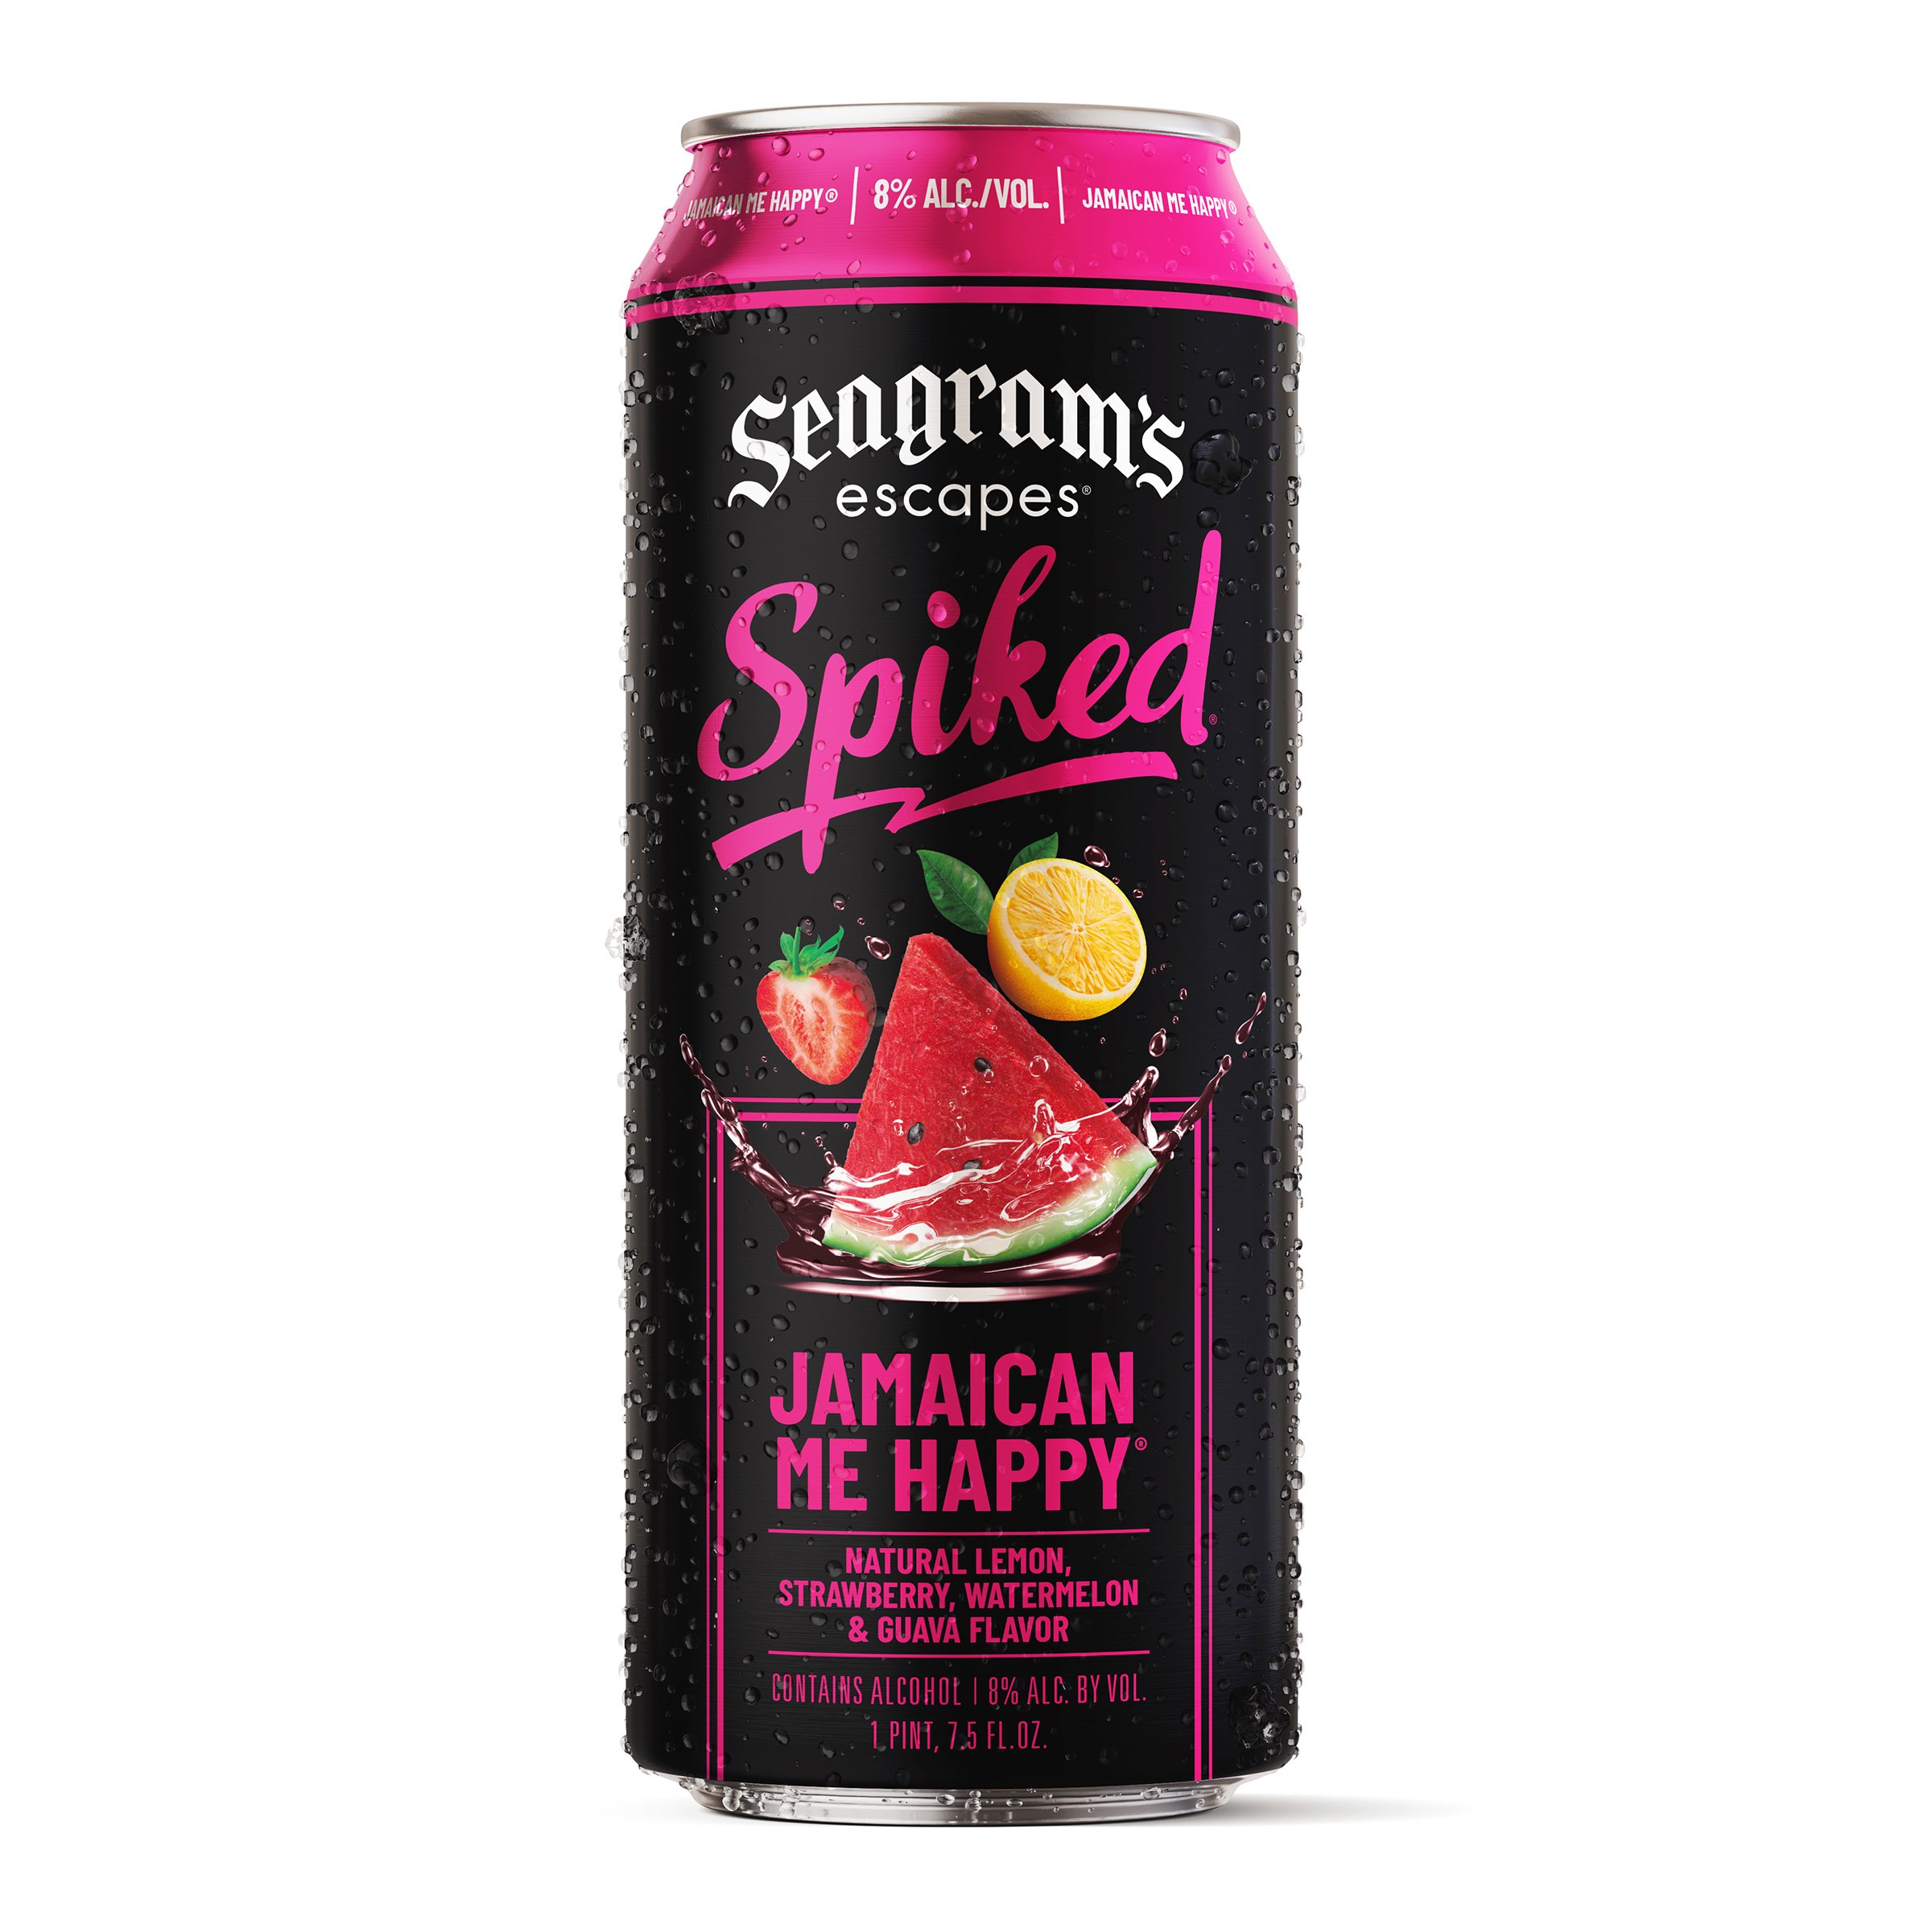 Seagrams Escapes Spiked Jamaican Me Happy Can Shop Malt Beverages